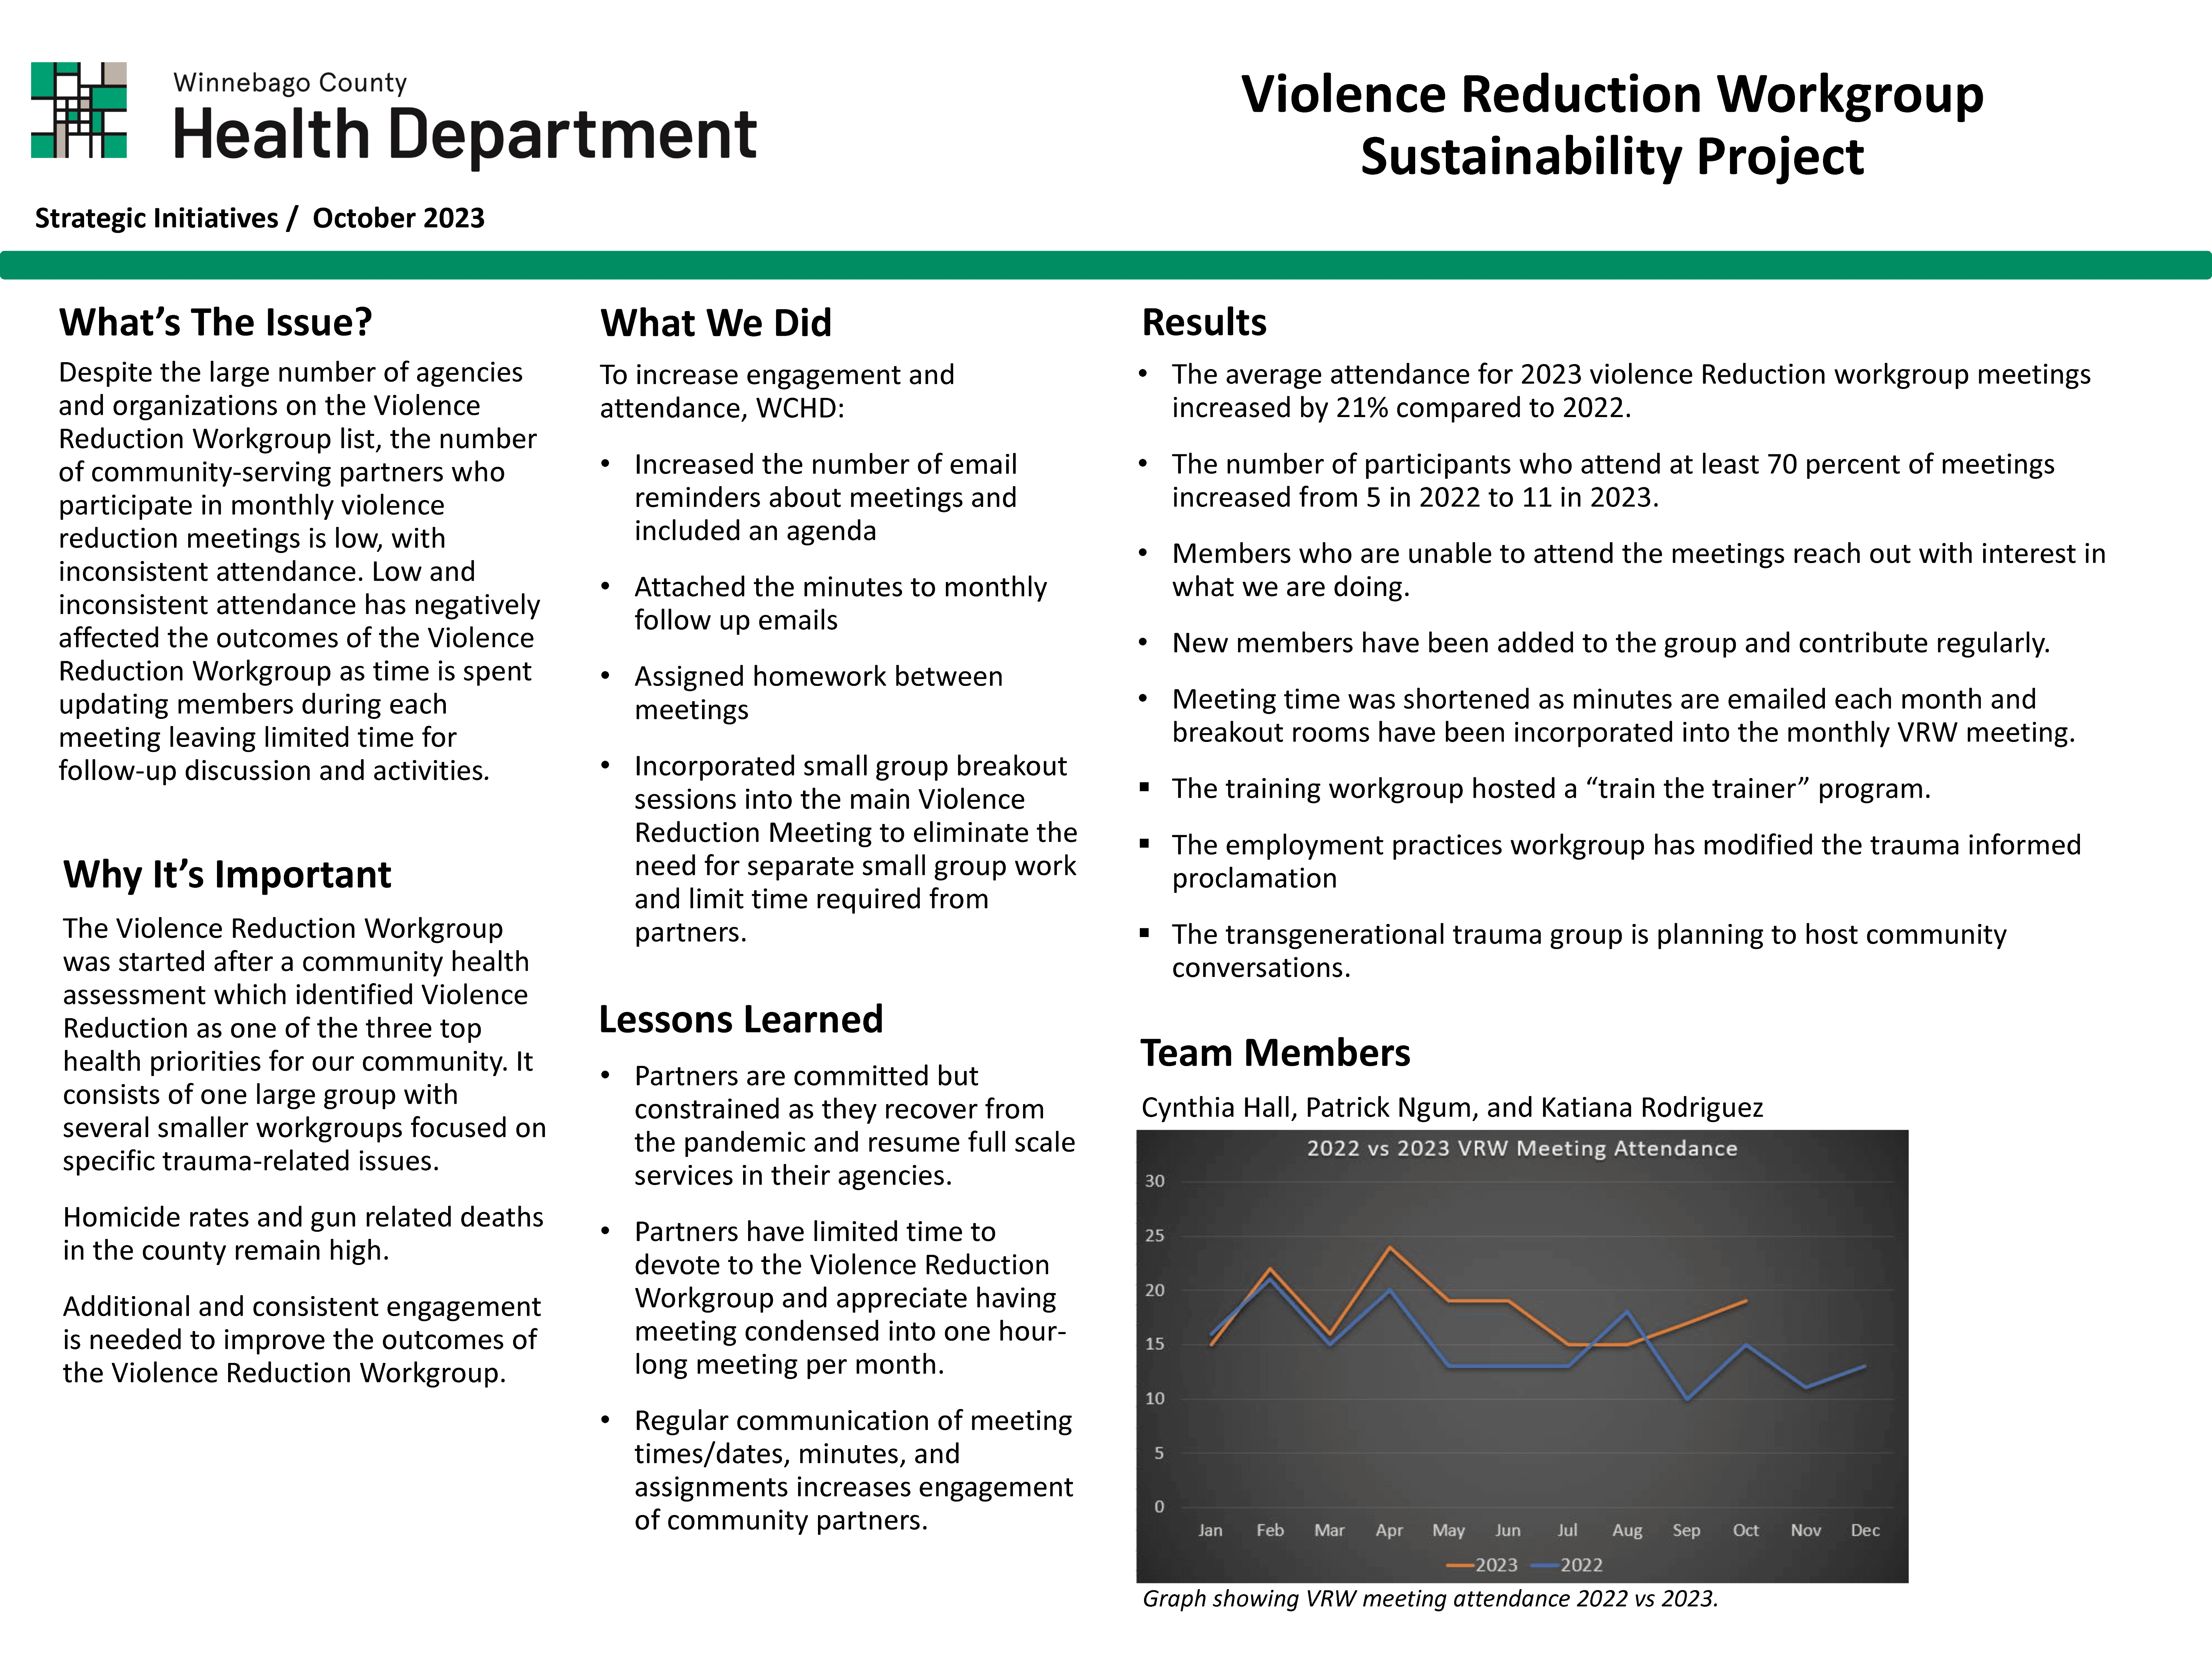 Violence Reduction Workgroup Sustainability Project 2023 Summary